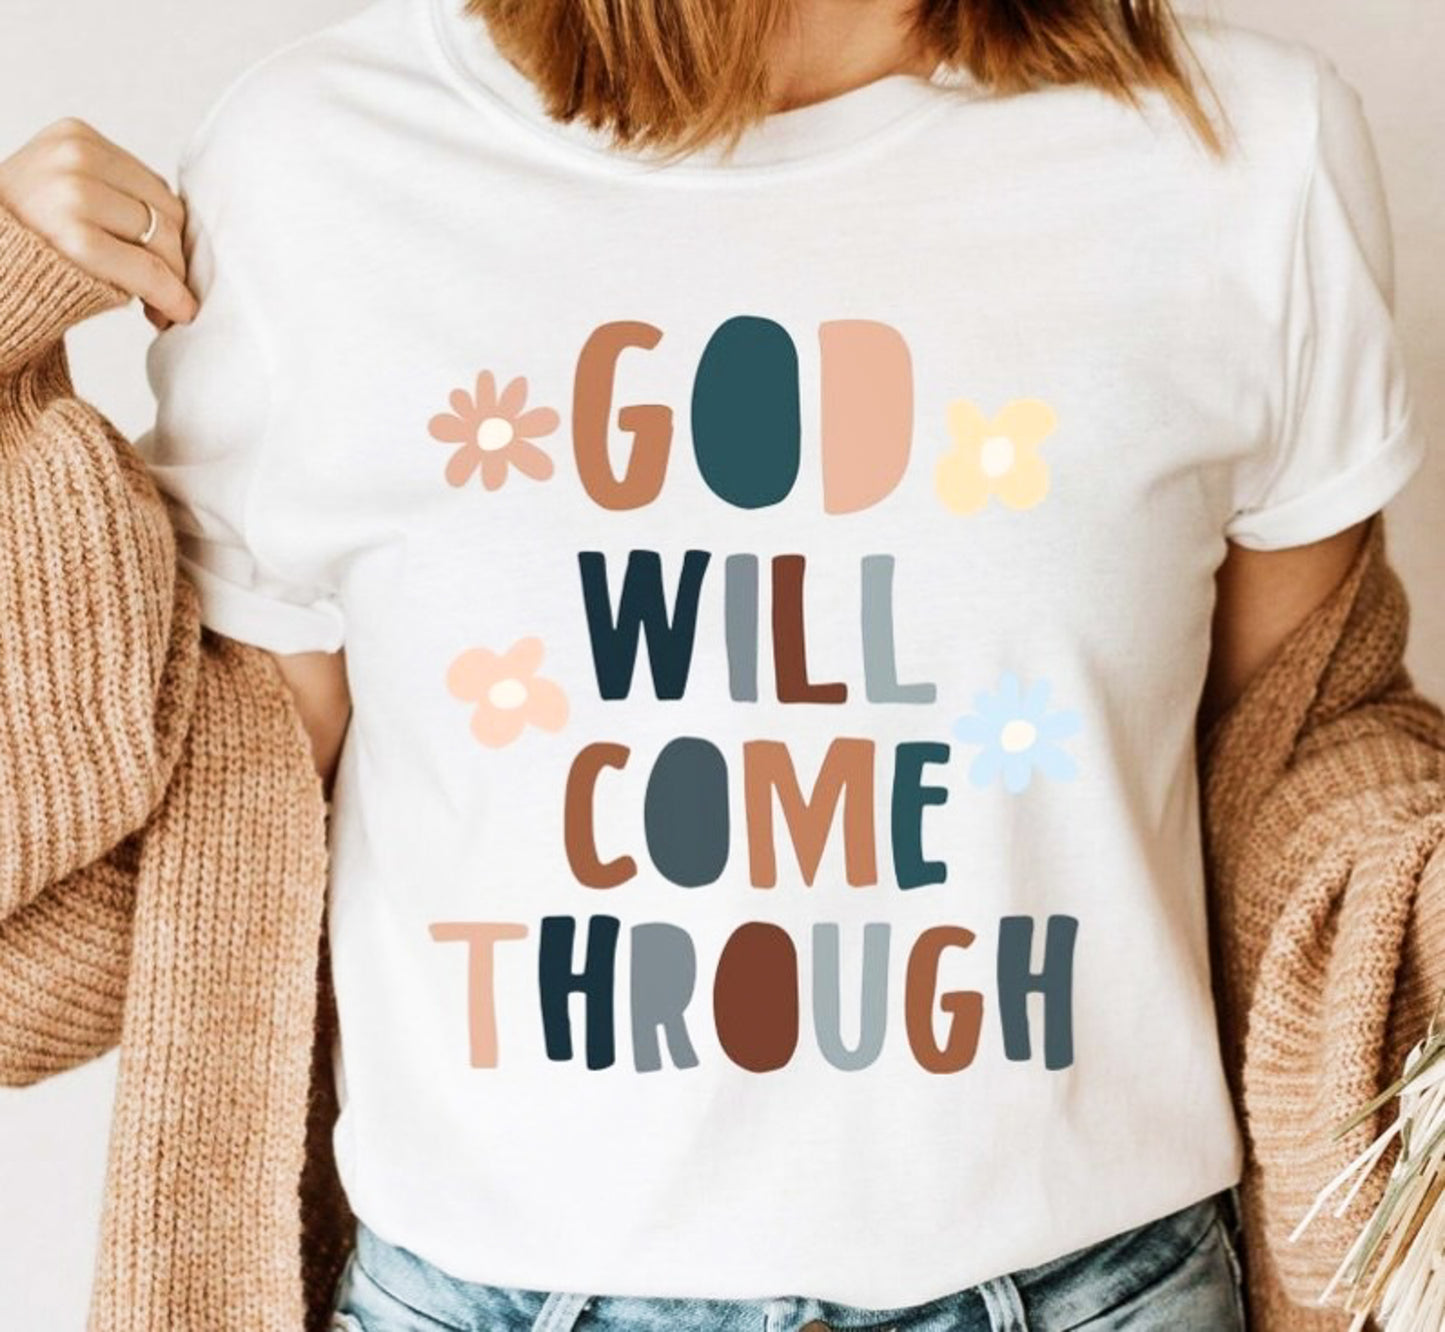 God Will Come Through Tee